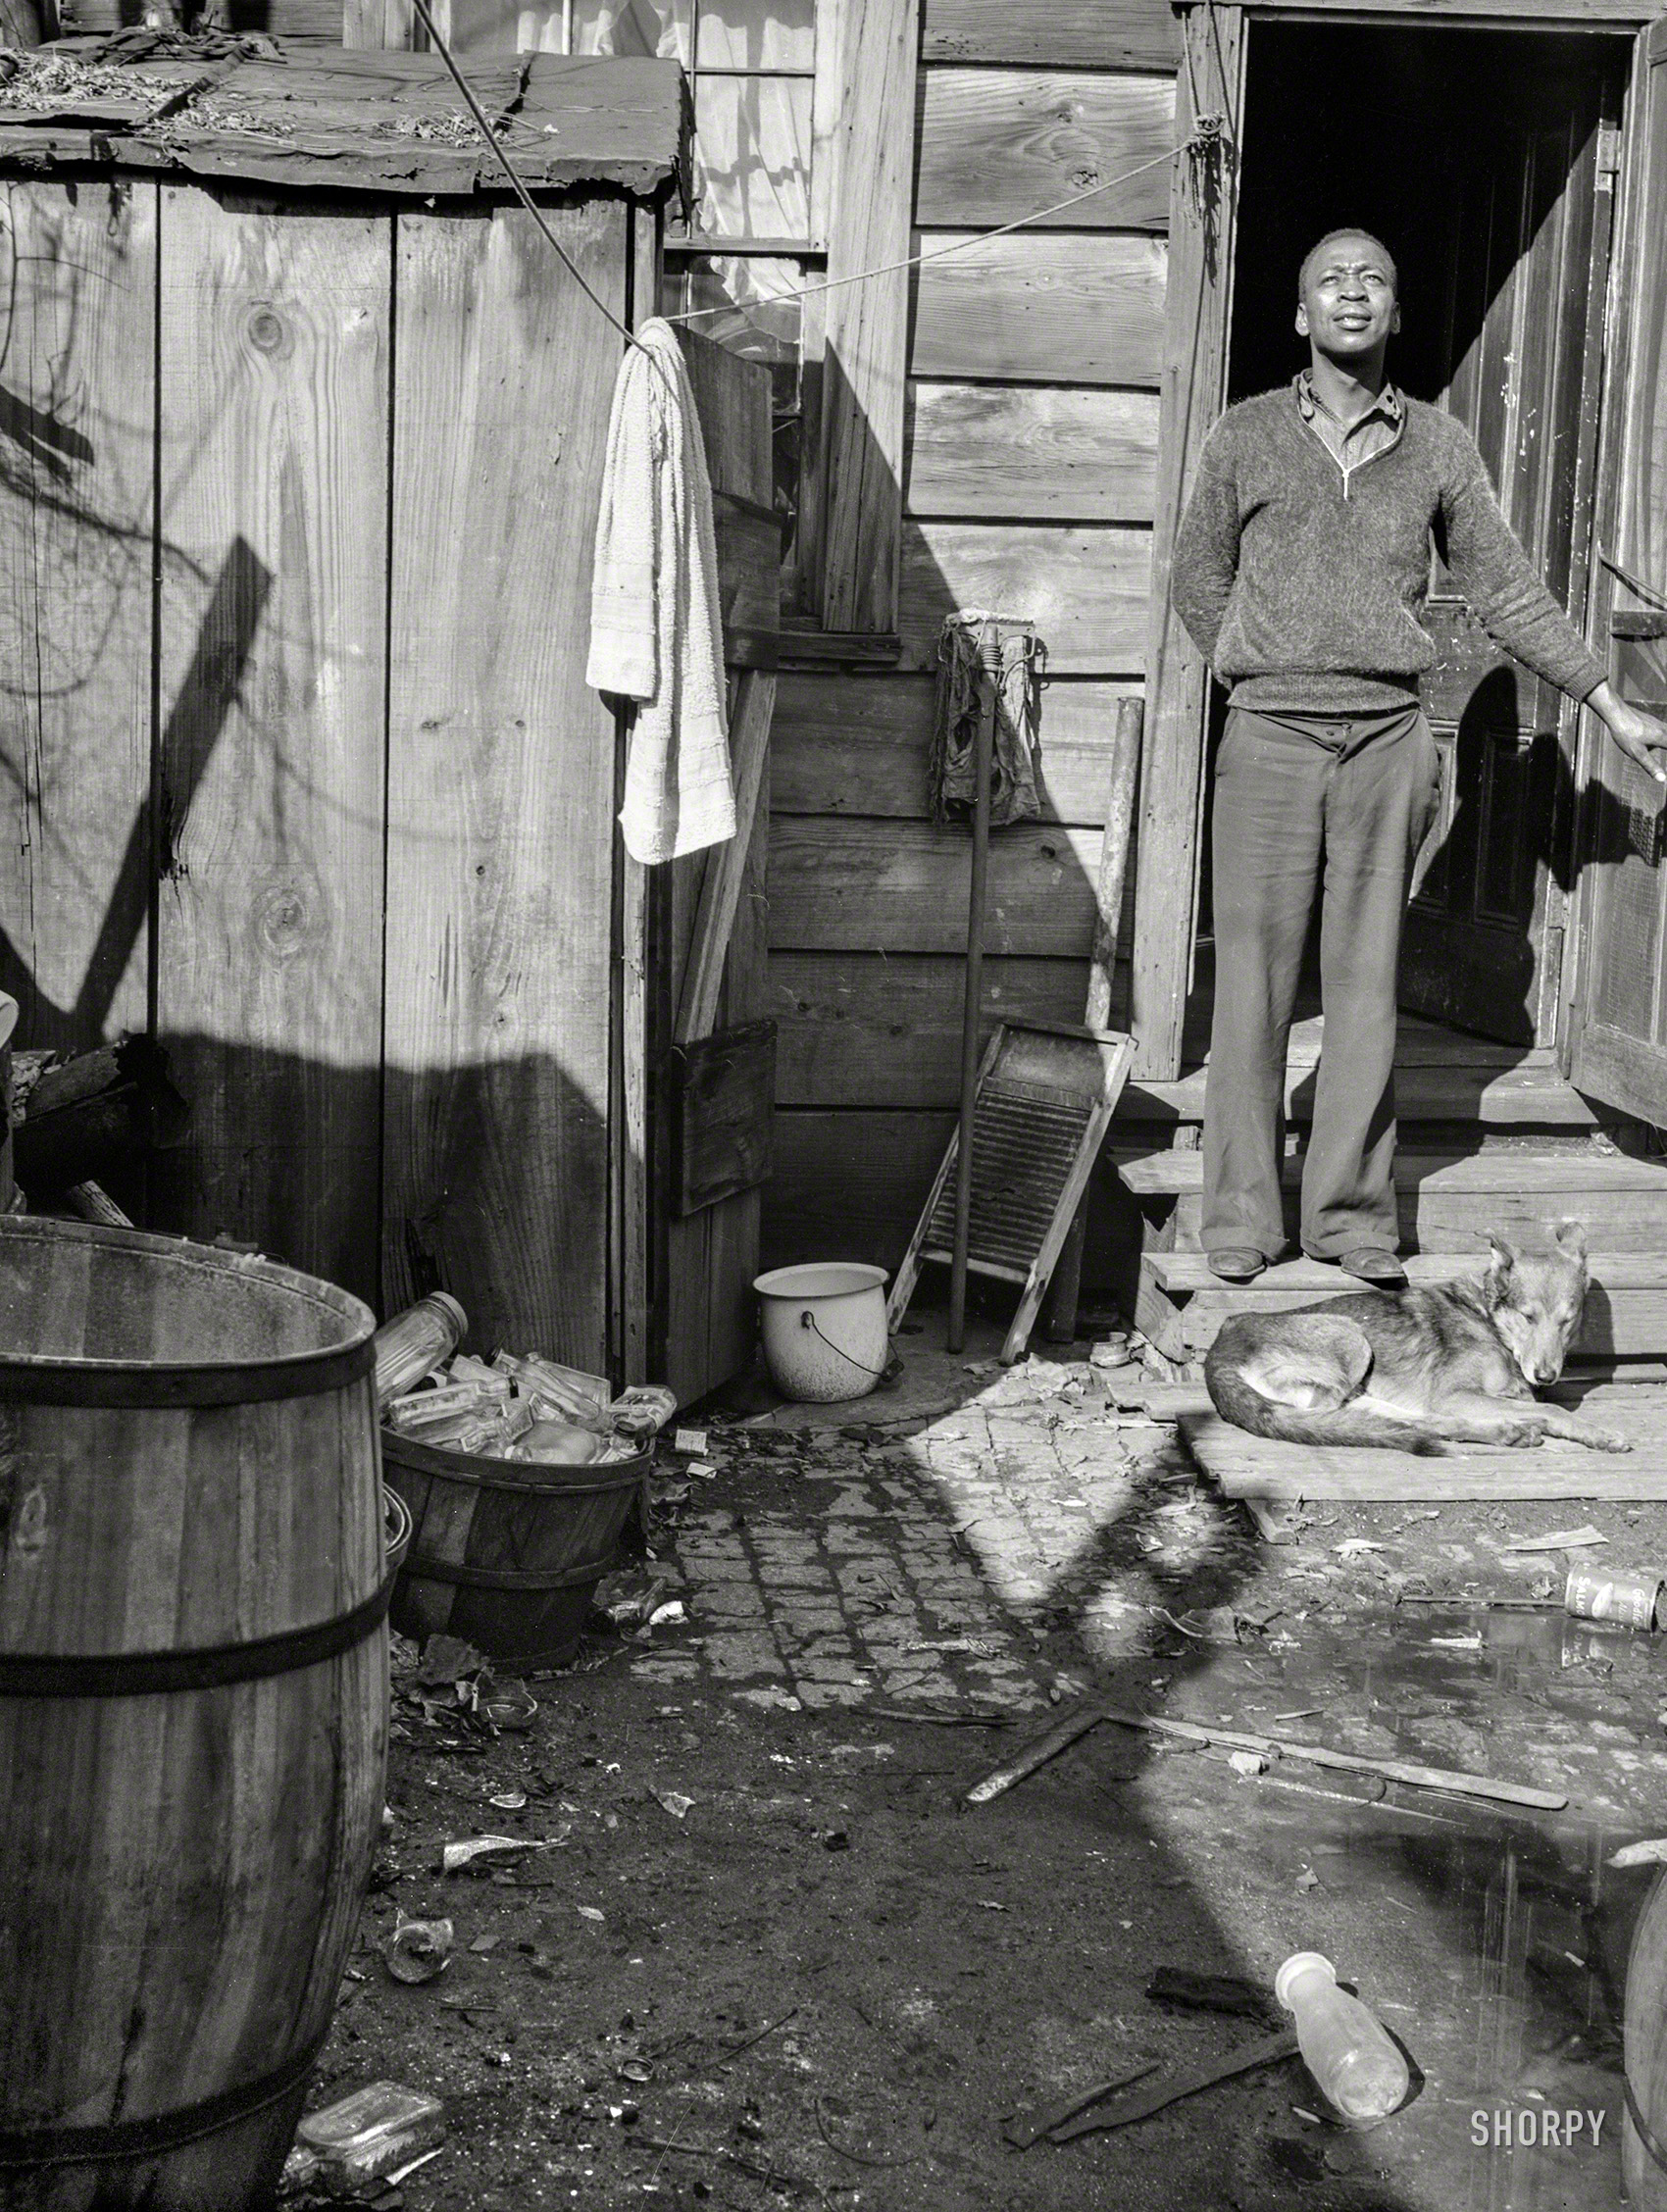 November 1935. "Backyard in Northwest Washington, D.C." Medium format negative by Carl Mydans for the Resettlement Administration. View full size.